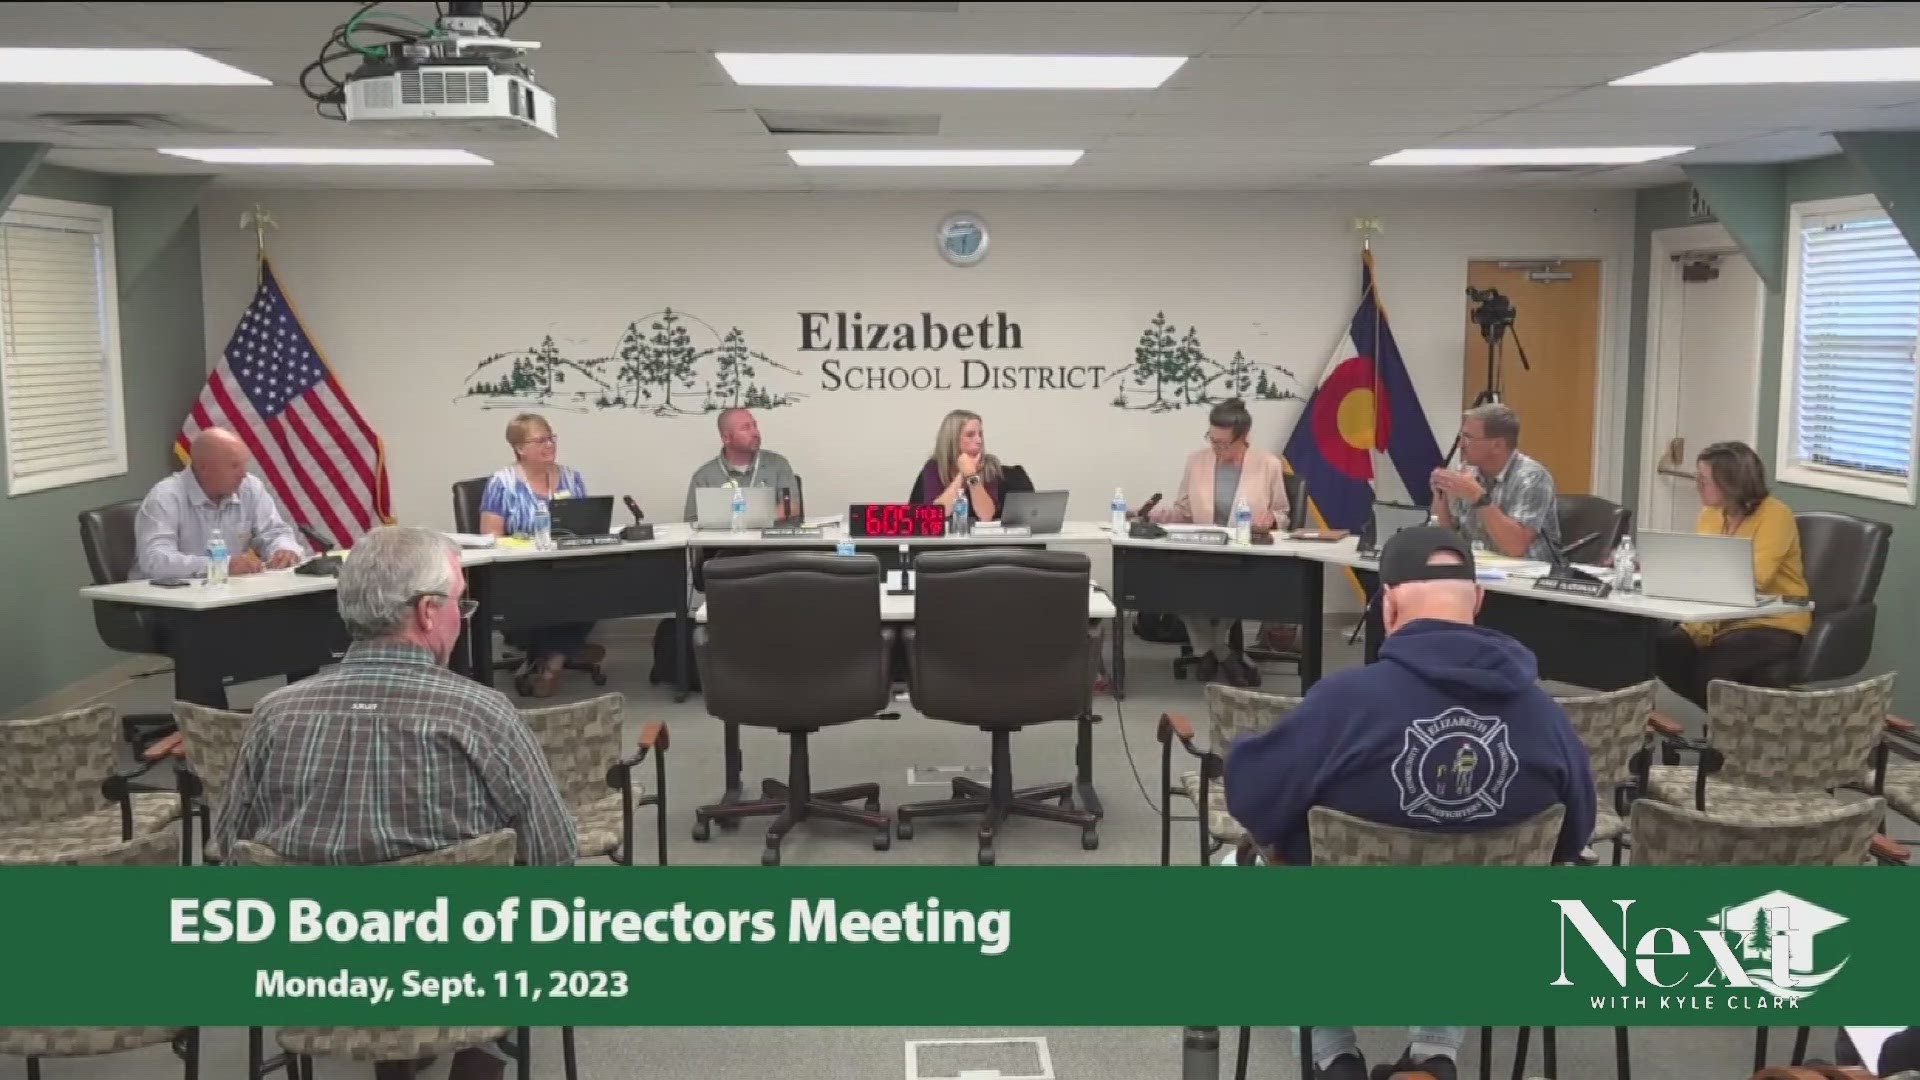 The Elizabeth School Board passed a resolution committing to in-person learning for all future school years and banning mask requirements and vaccine mandates.